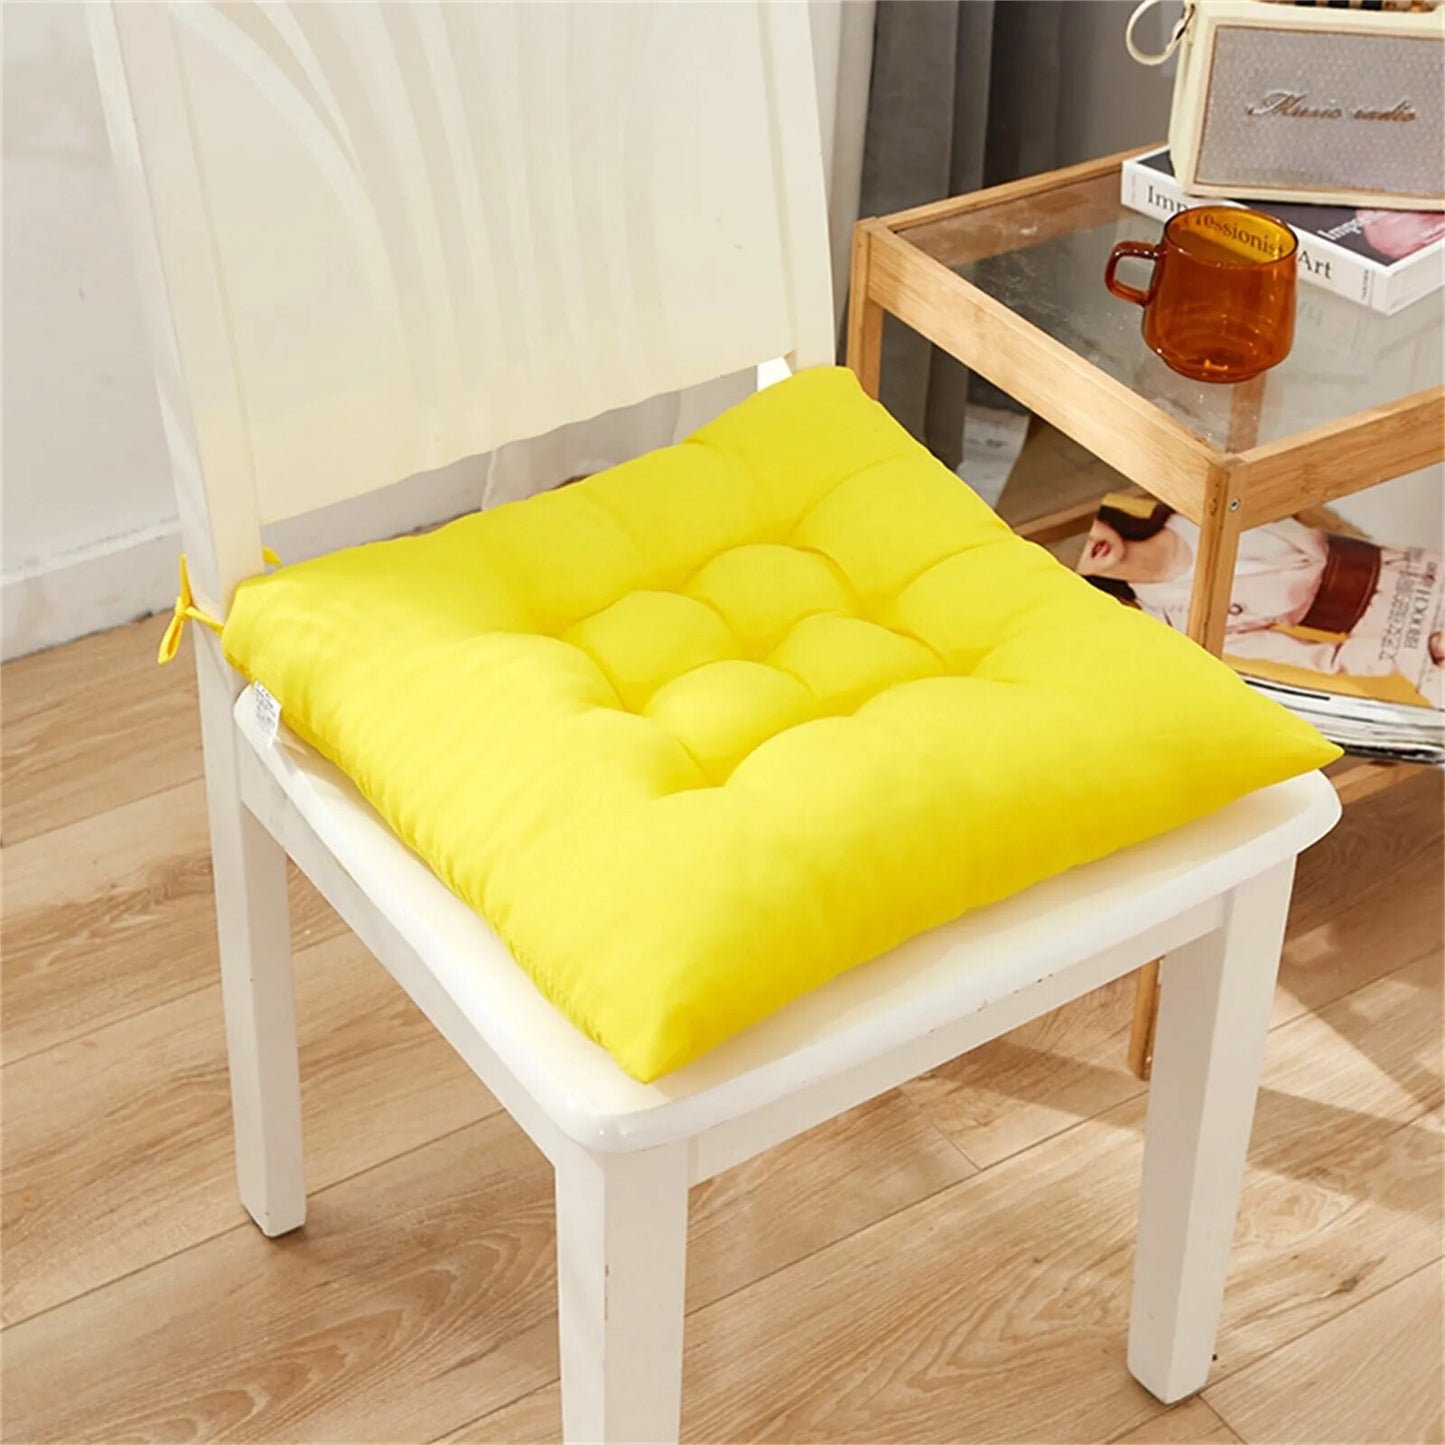 Square Chair Soft Pad Thicker Seat Cushion For Dining Patio Home Office Indoor Outdoor Garden Sofa Buttocks Cushion With Strap